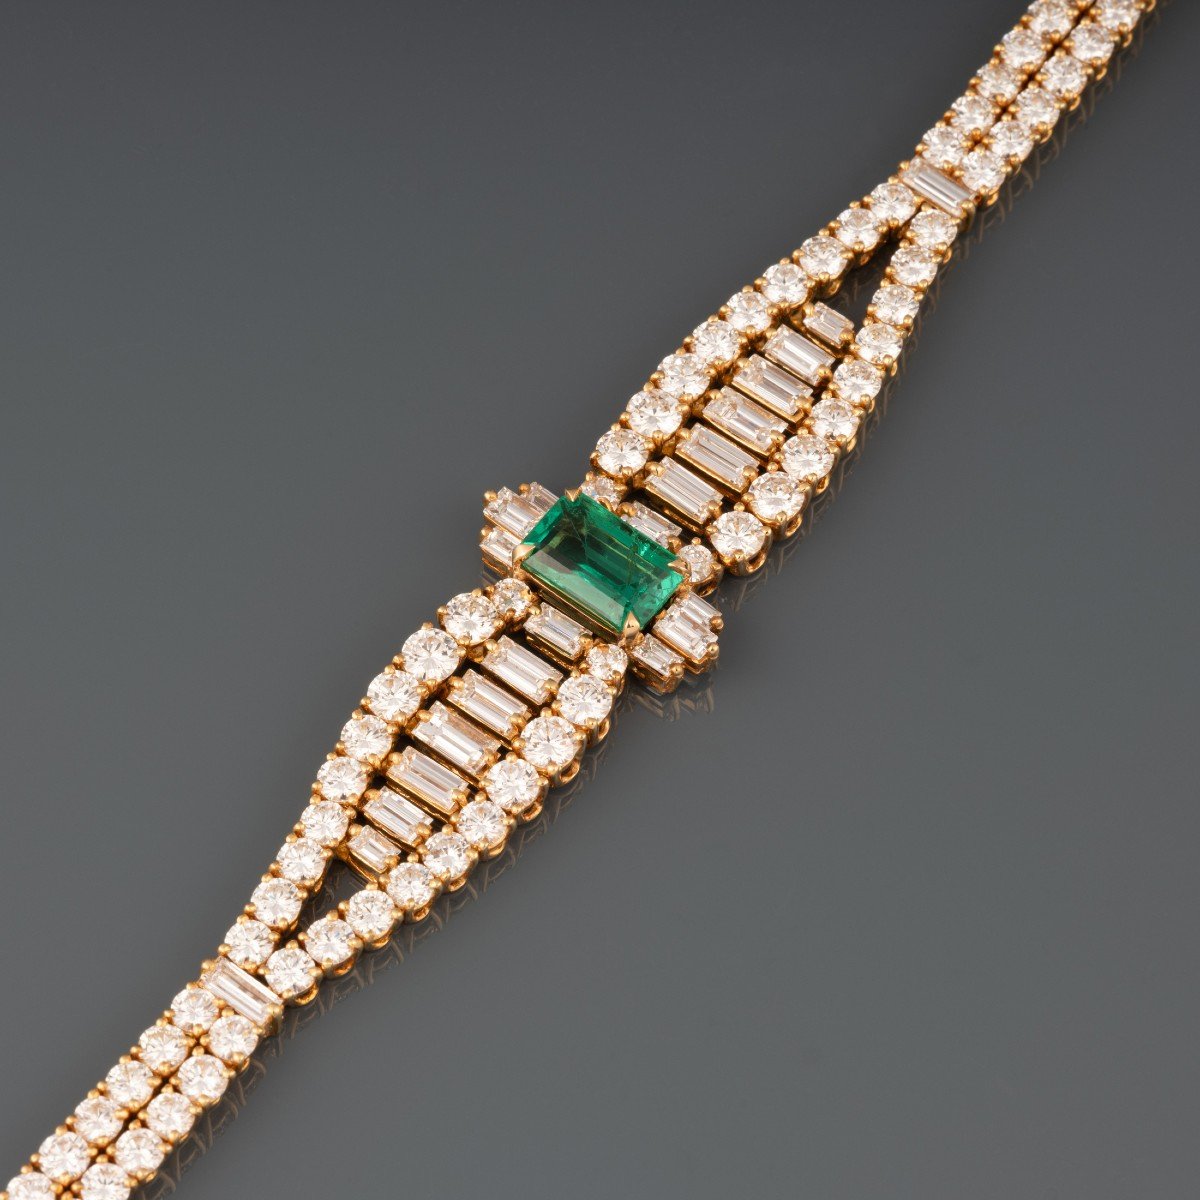 Bracelet In 13 Carat Gold With Diamonds And 2 Carats Of Emerald By Mouawad-photo-2